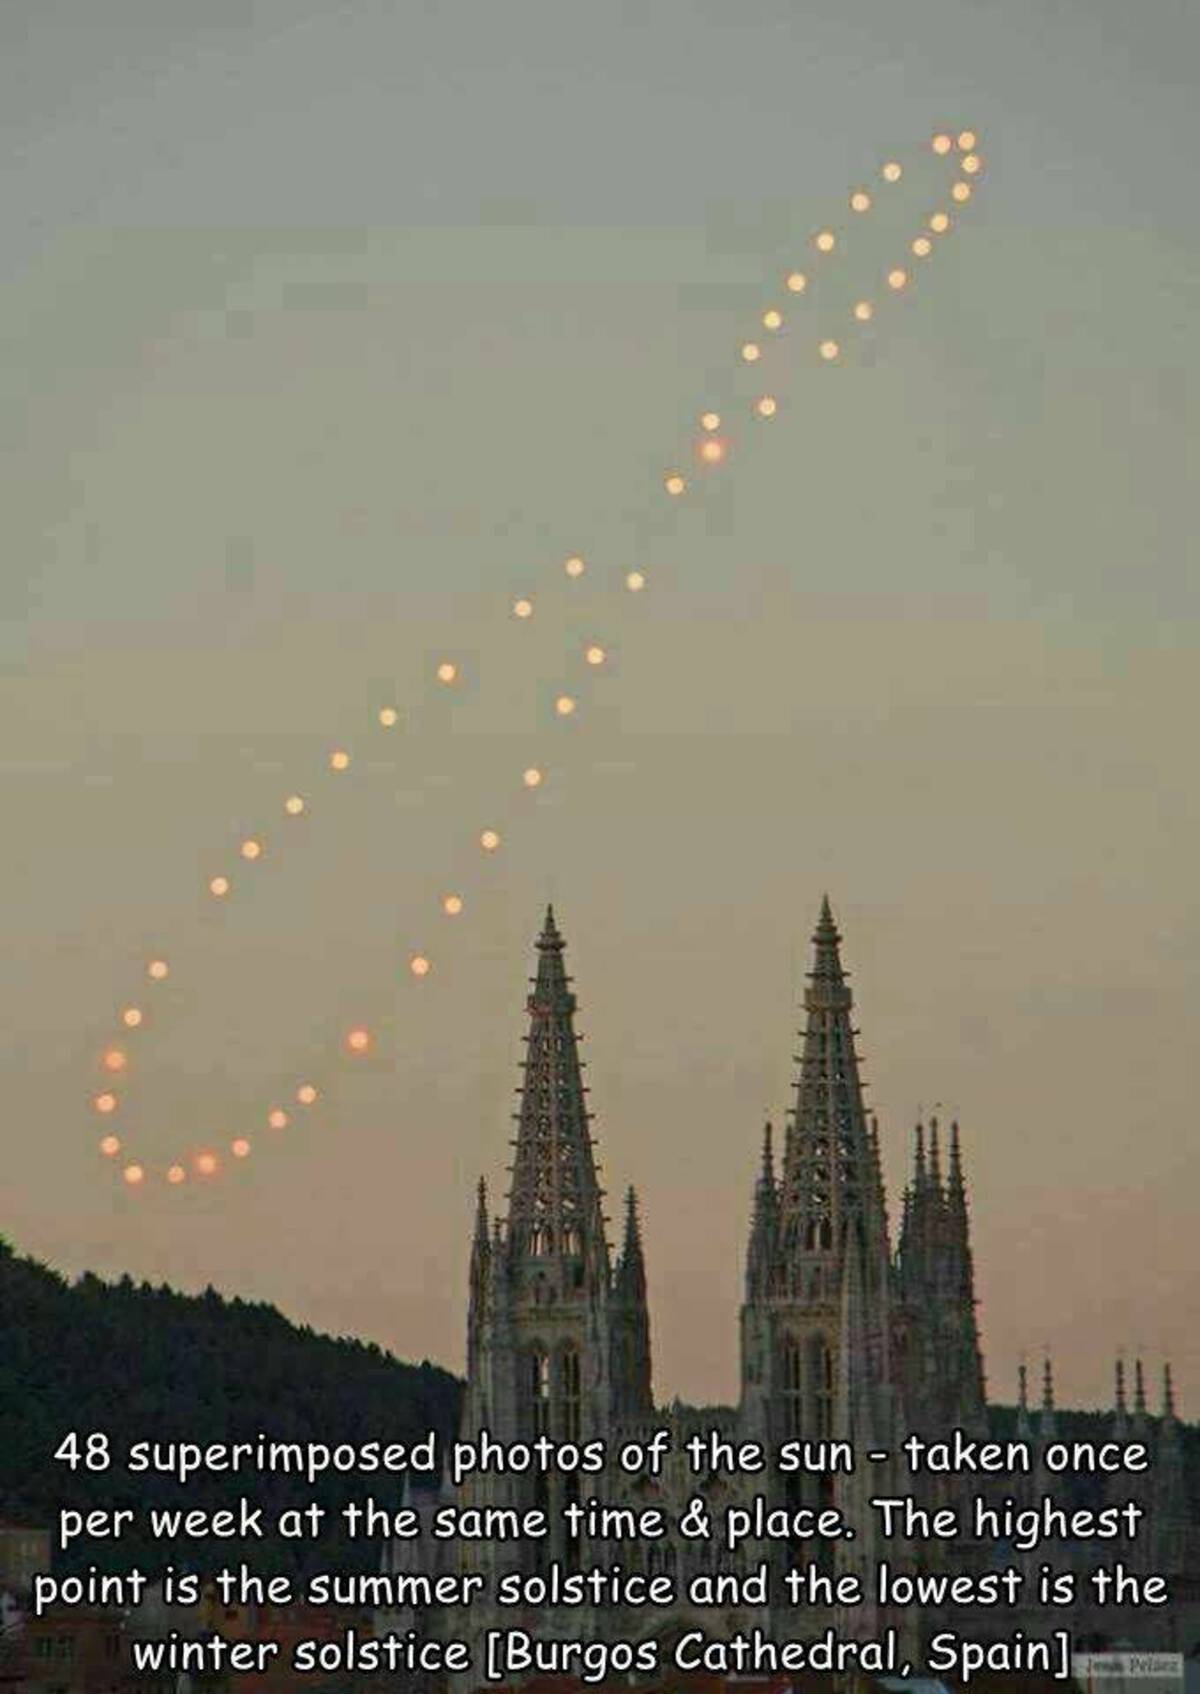 mak 48 superimposed photos of the sun taken once per week at the same time & place. The highest point is the summer solstice and the lowest is the winter solstice Burgos Cathedral, Spain Pelaez